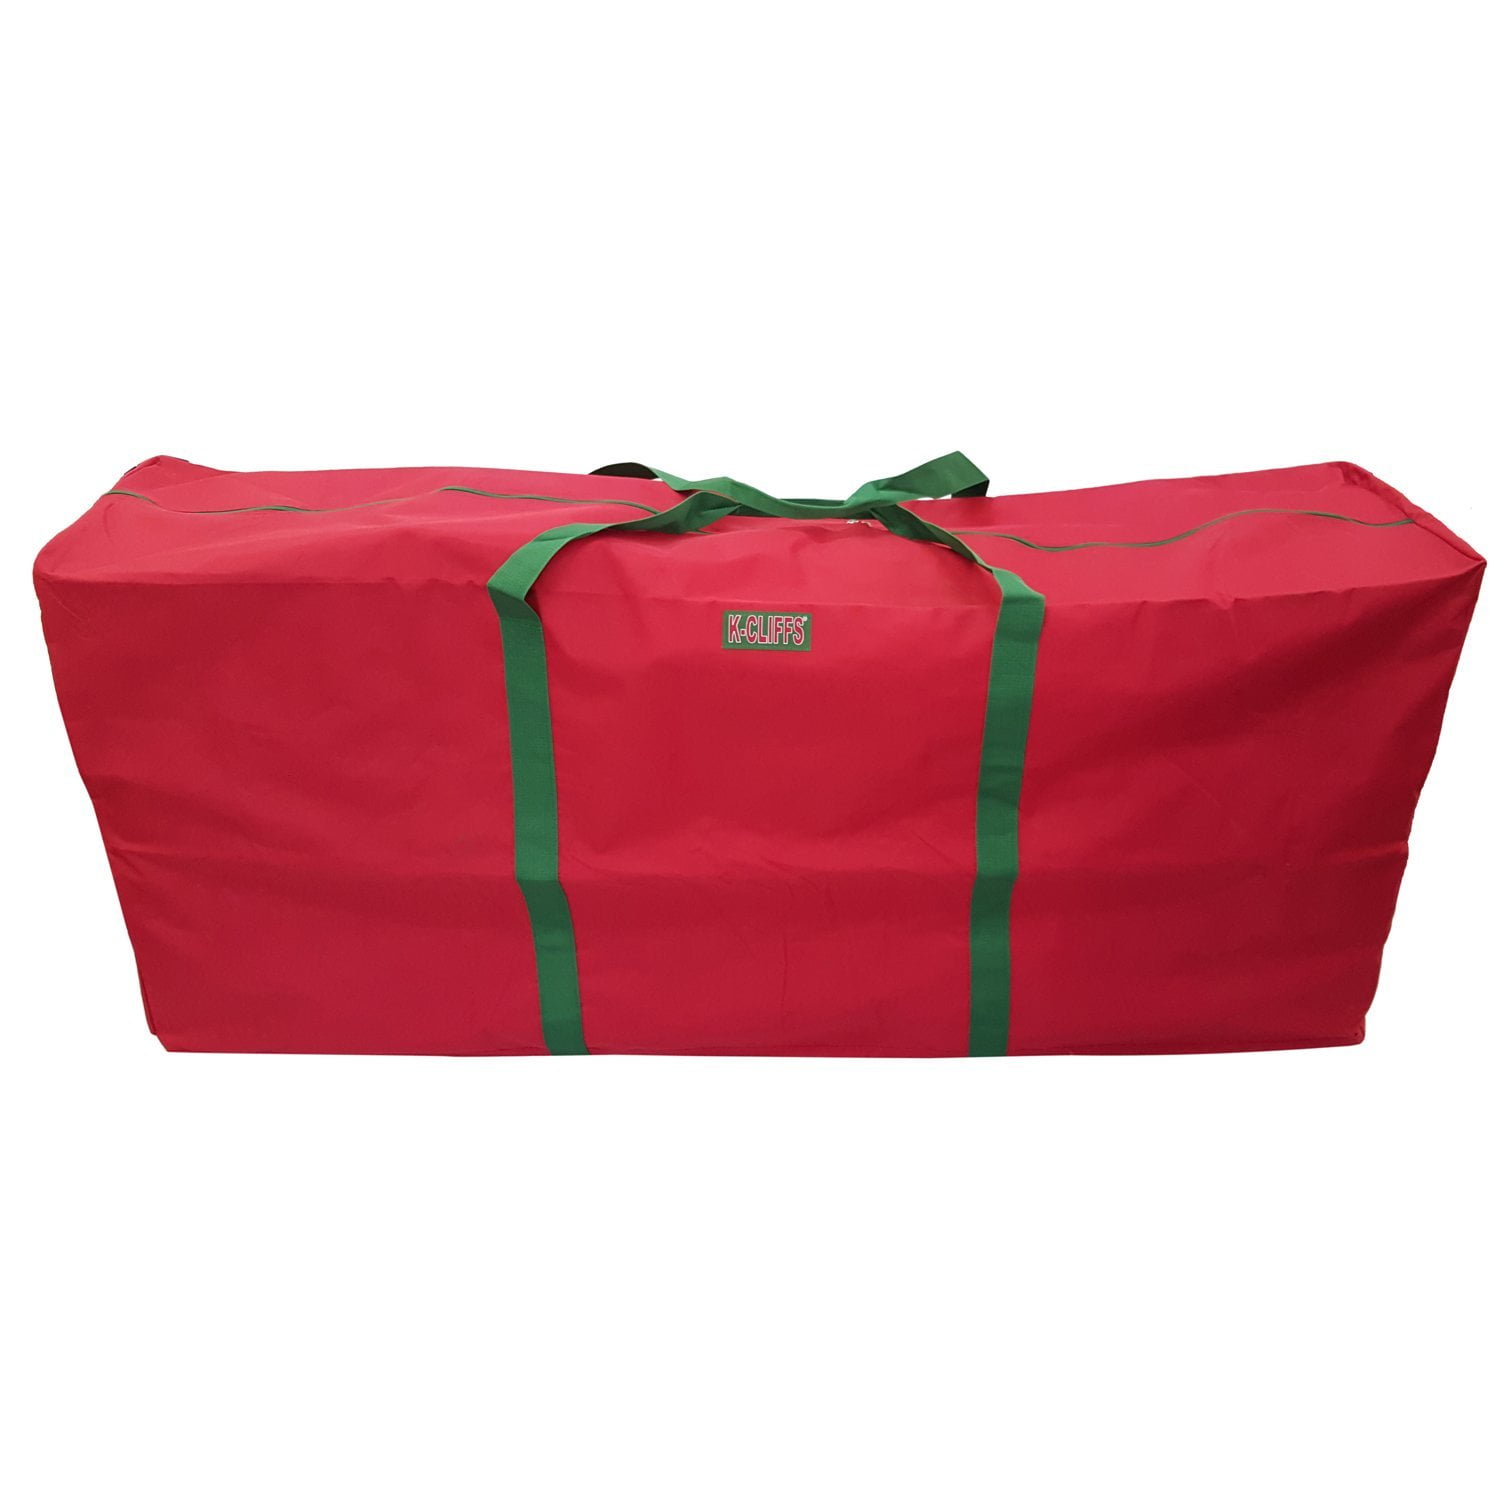 Durable Carry Handles. Holiday Accessories Storage Bag Red Heavy Duty Tarp Material Zipper Closure 